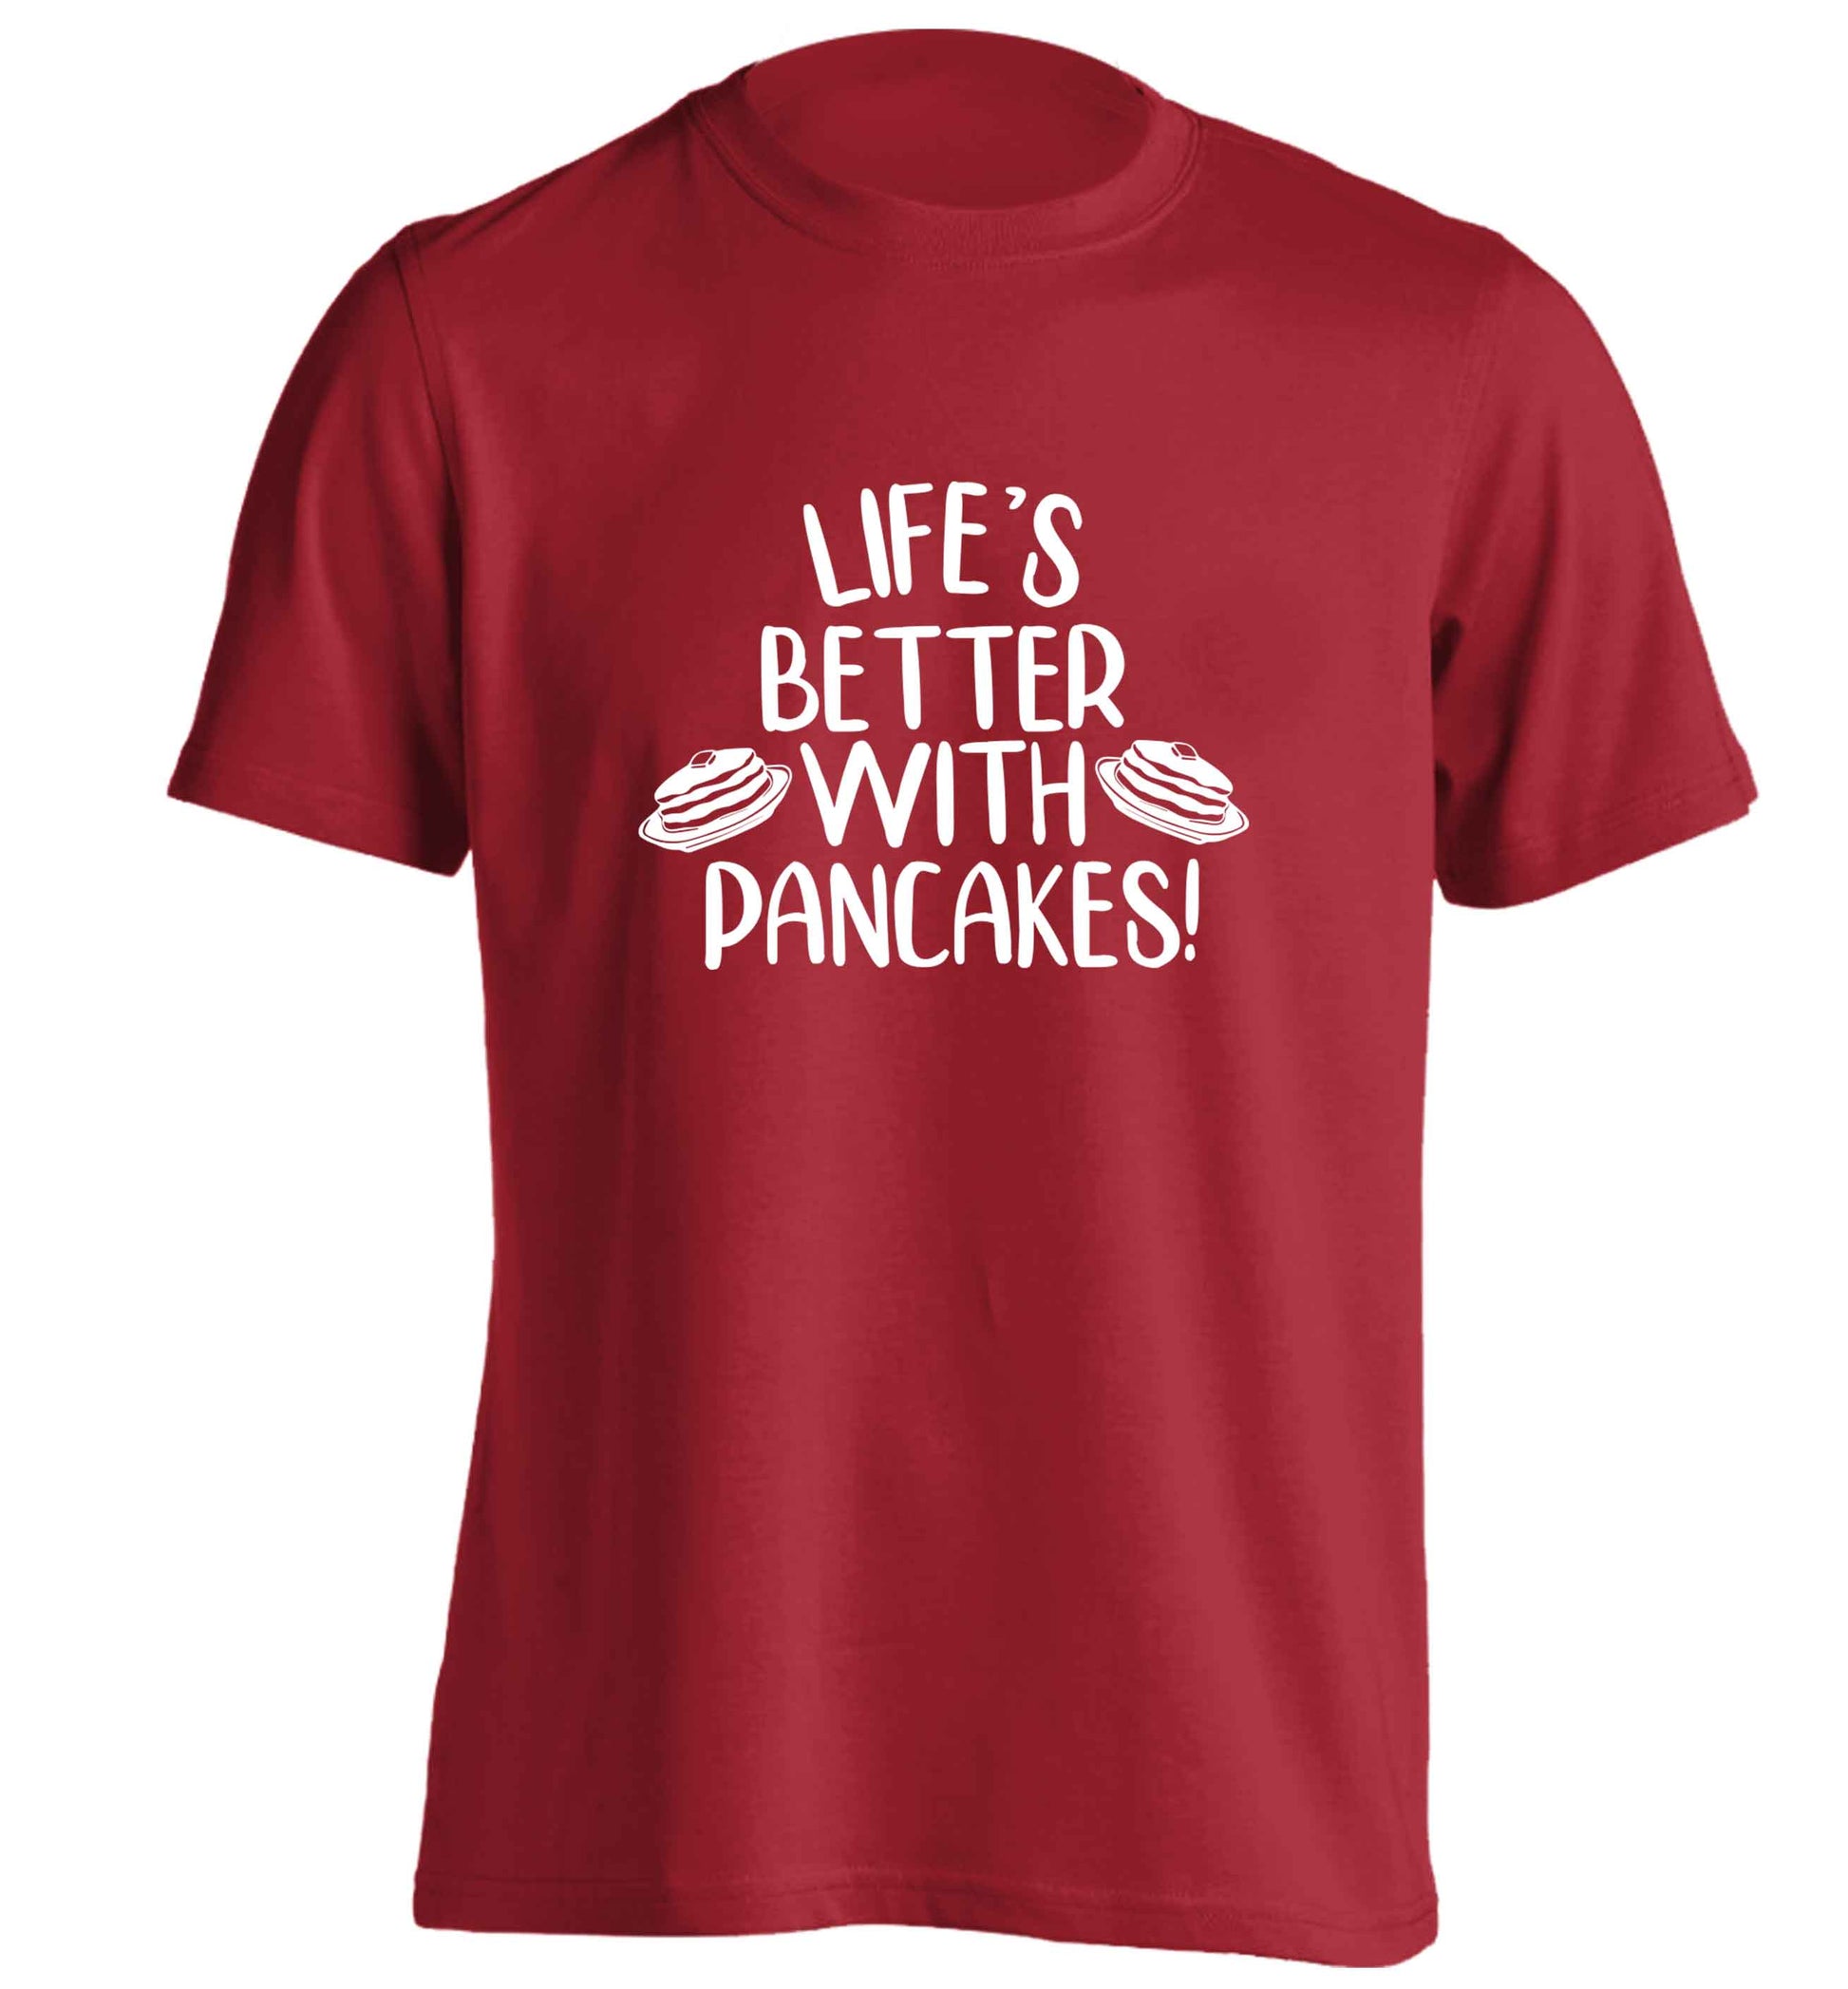 Life's better with pancakes adults unisex red Tshirt 2XL